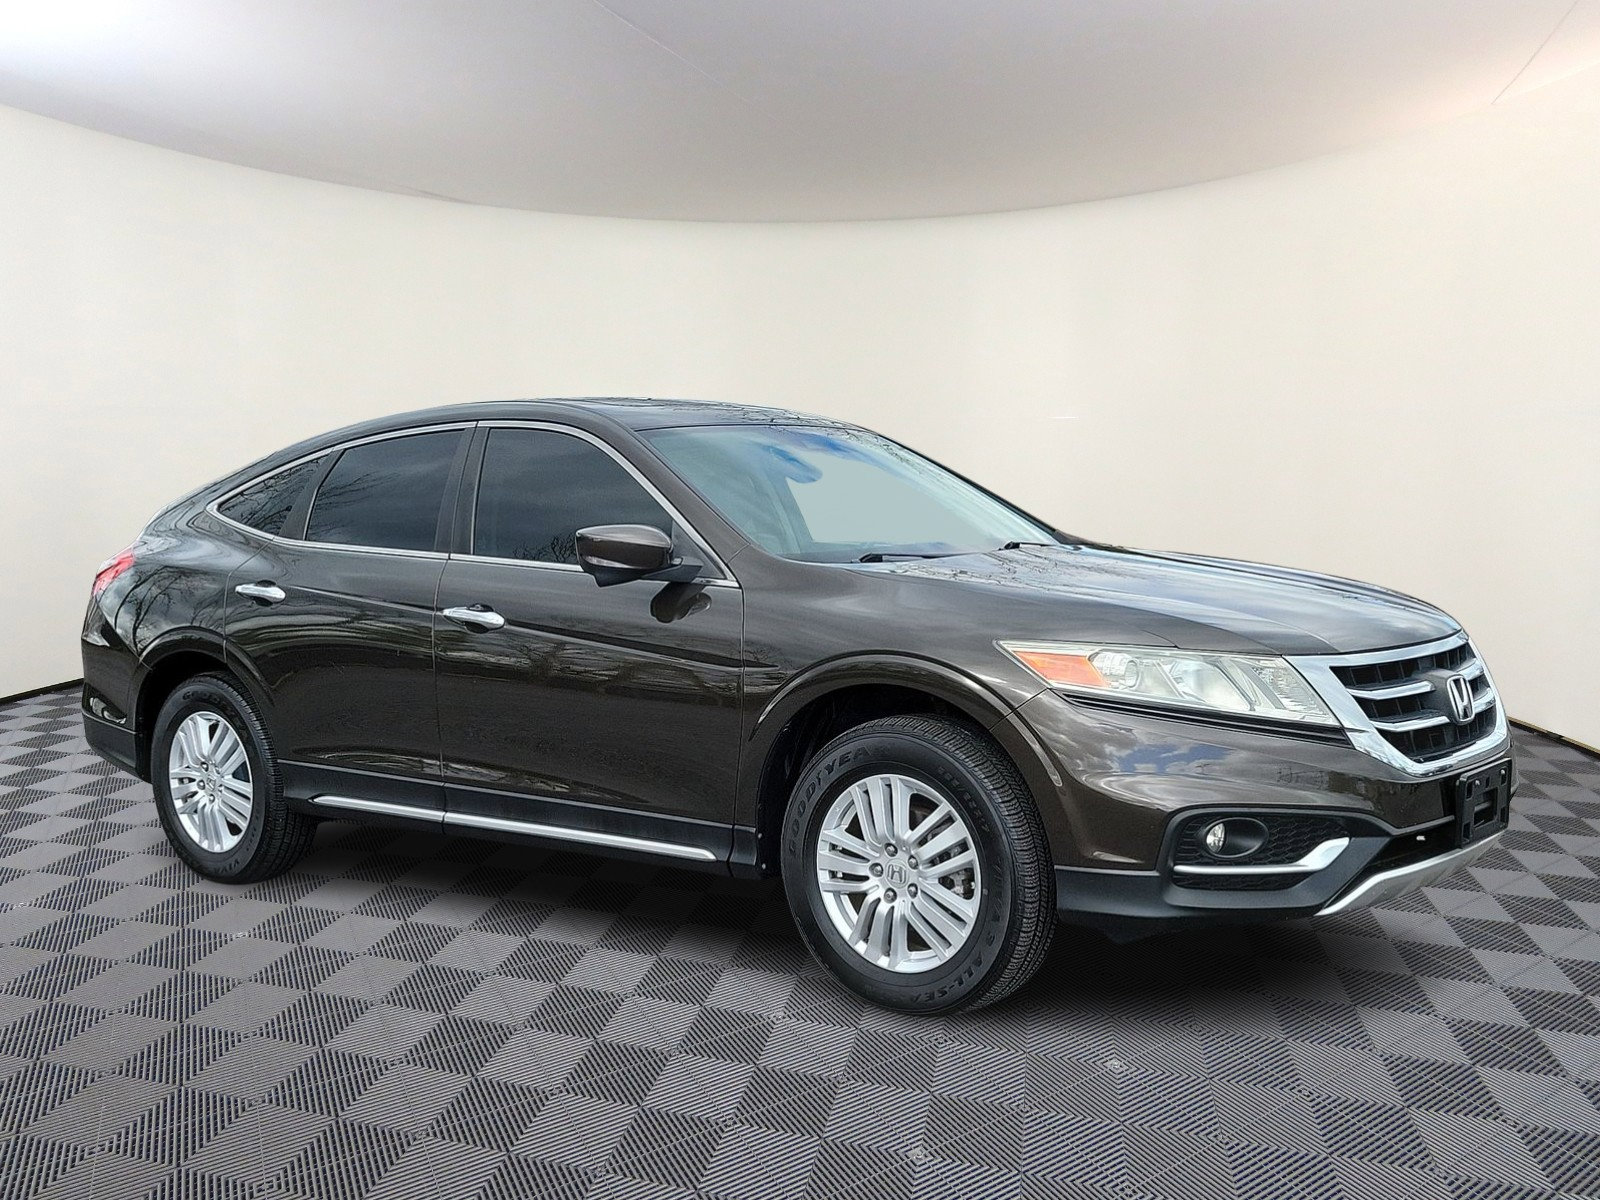 Used 2015 Honda Crosstour for Sale Near Me in White Marsh, MD - Autotrader